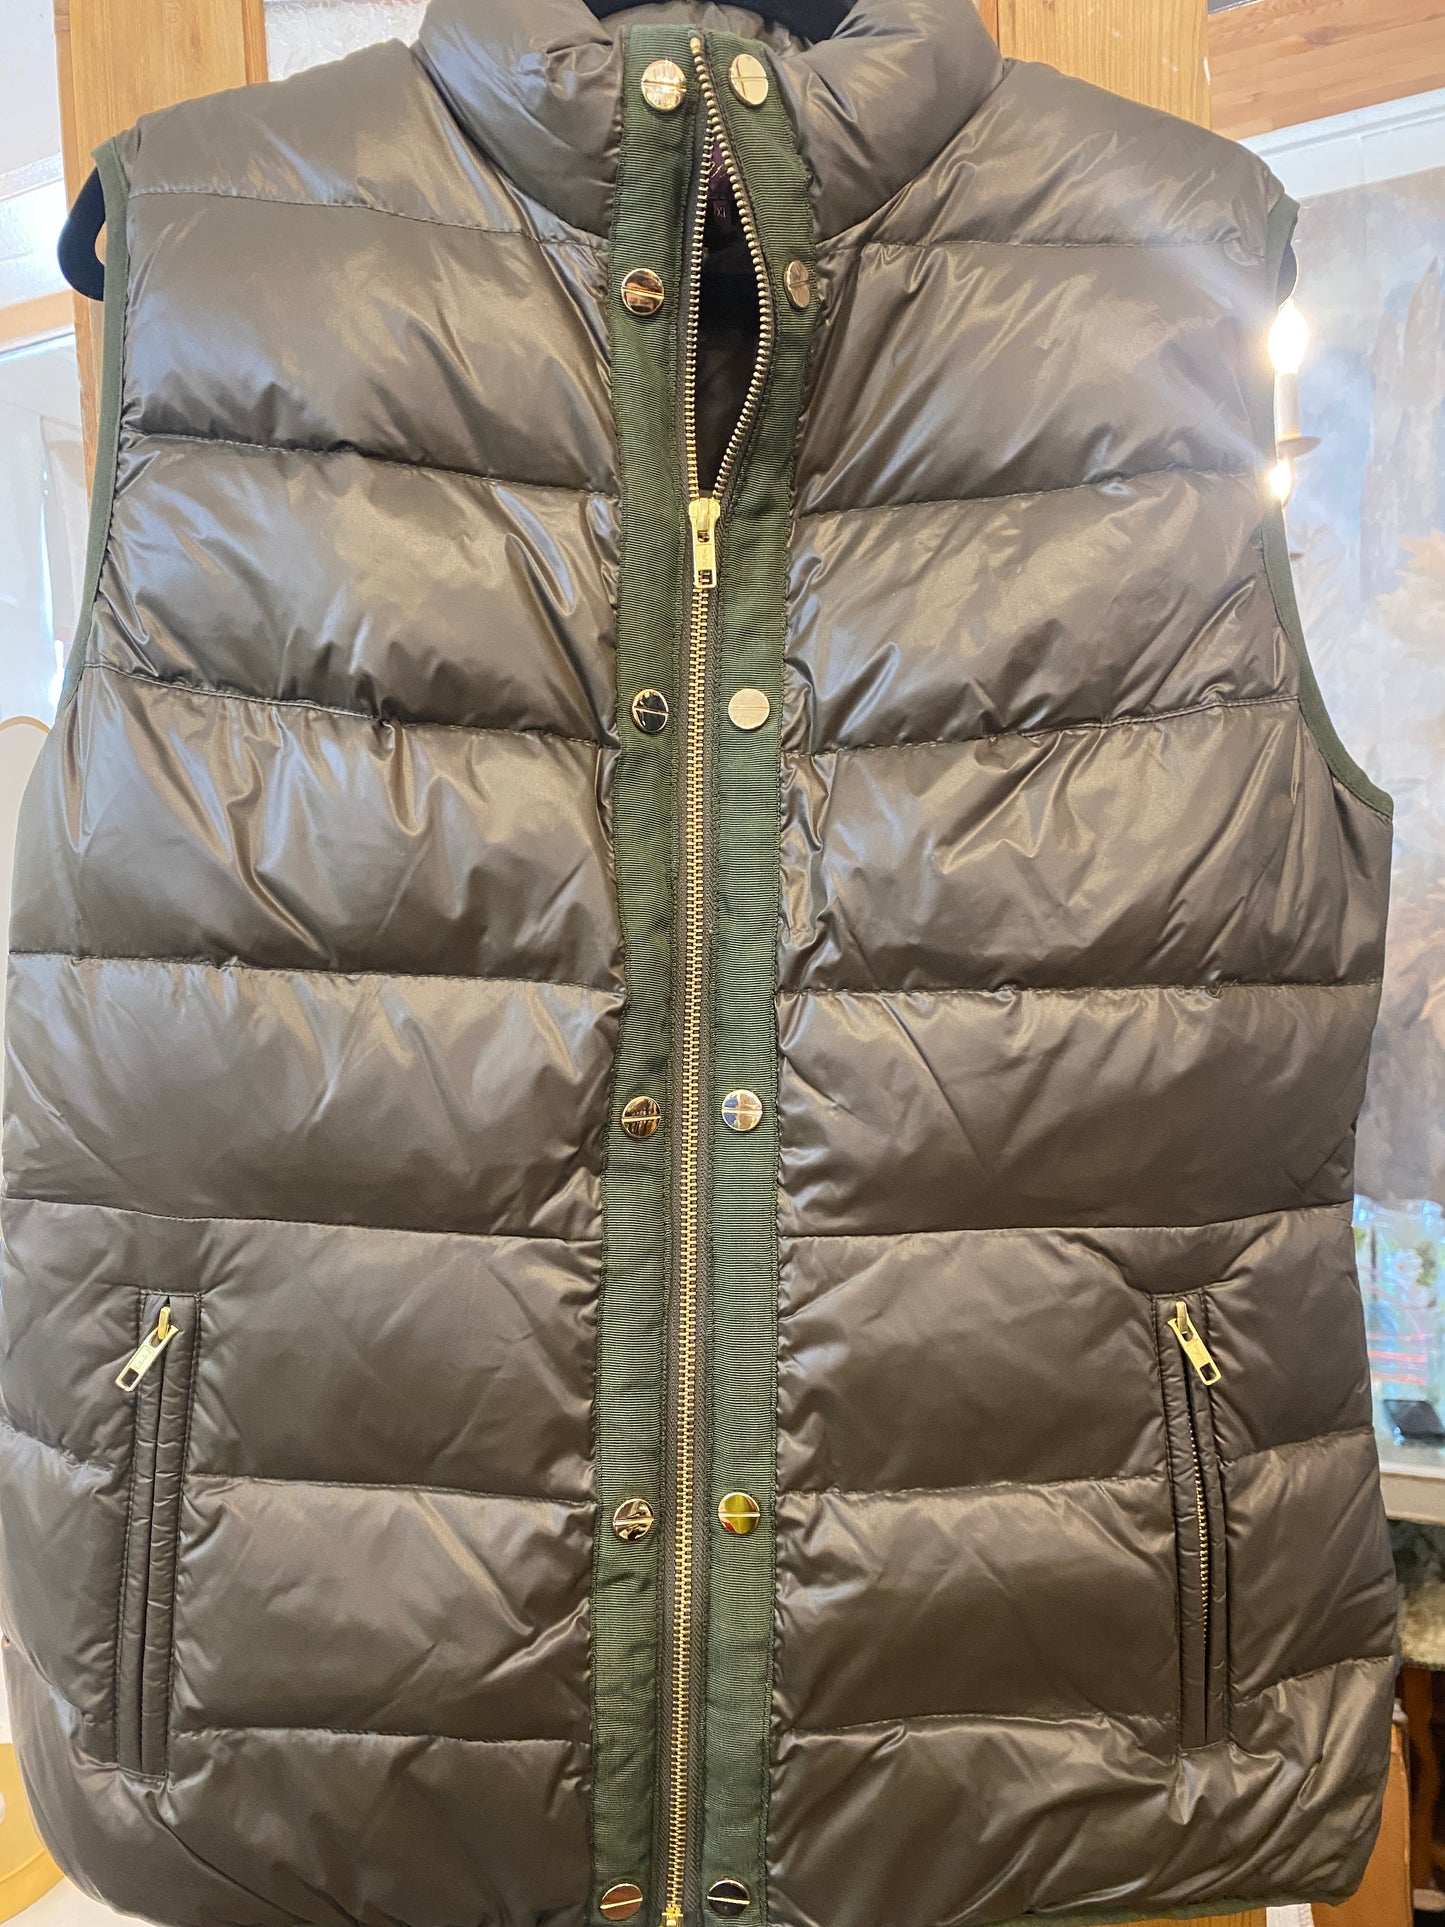 Down Vest With Gold Love Studs on Front